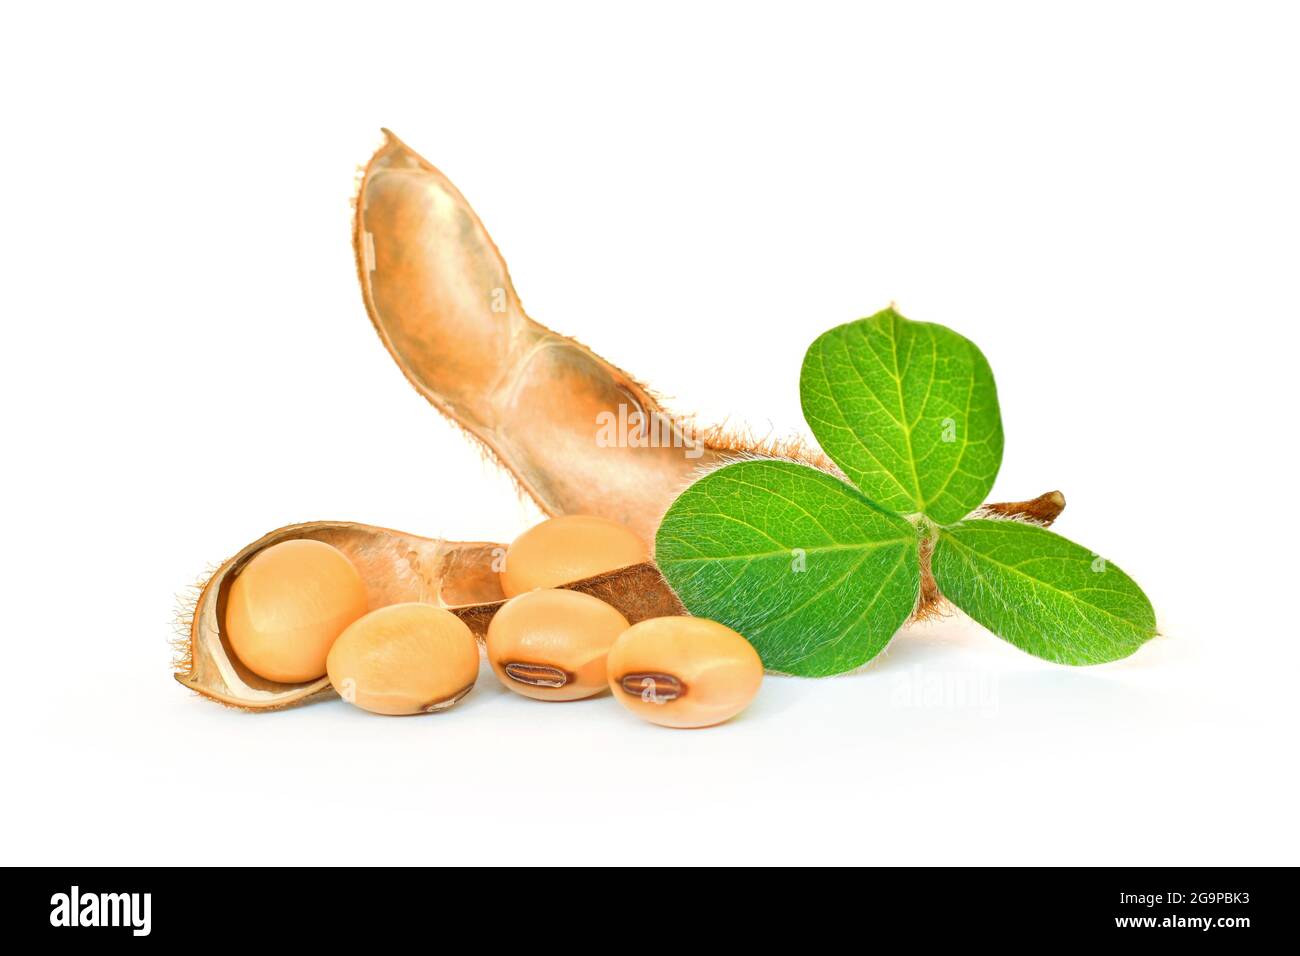 Soybean seeds with soy leaf on white background Stock Photo